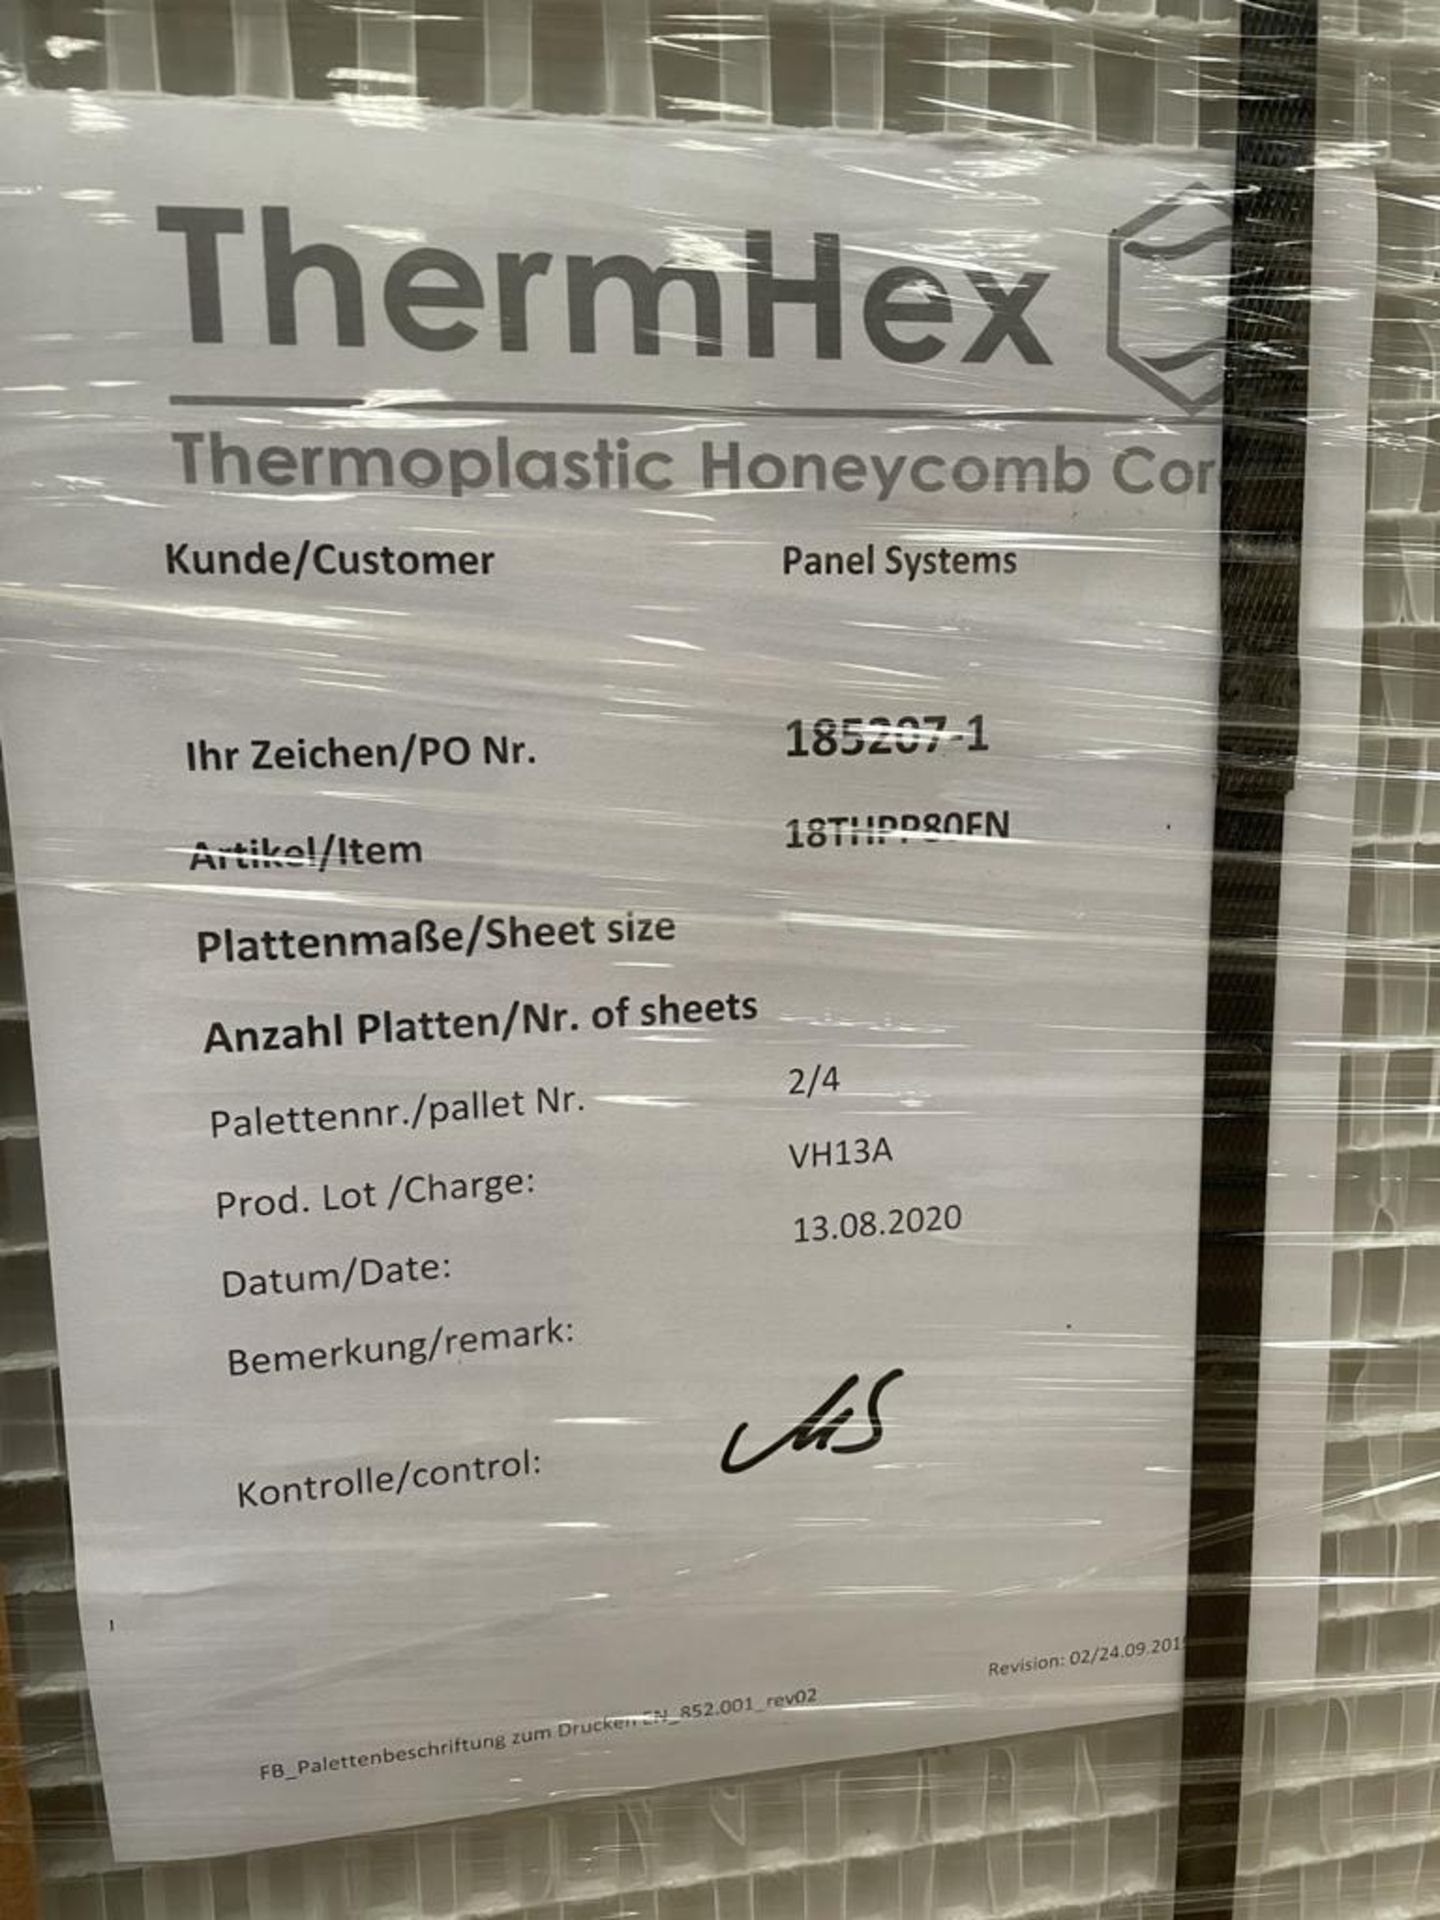 50 x ThermHex Thermoplastic Honeycomb Core Panels - Size 693 x 1210 x 18mm - New Stock - Lightweight - Image 7 of 8